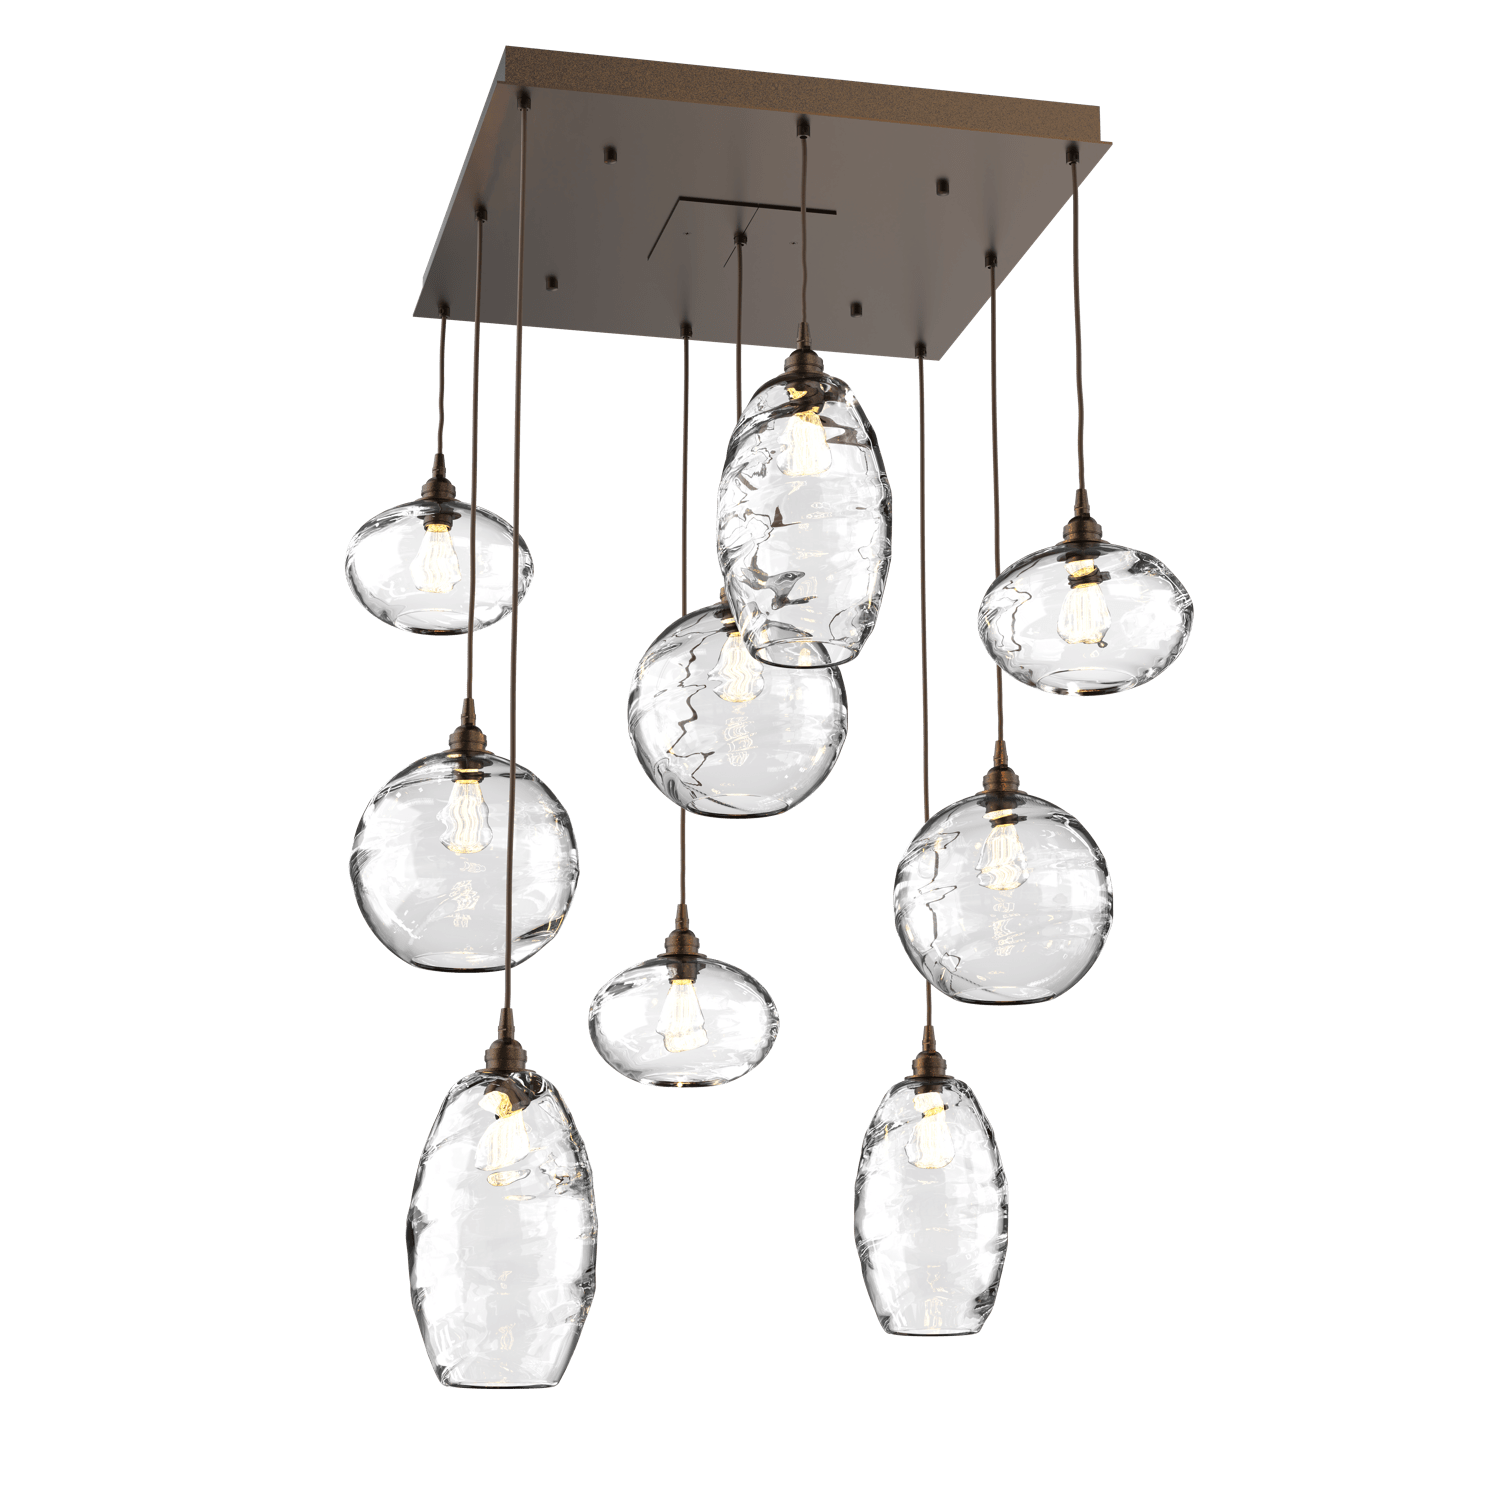 CHB0048-09-FB-OC-Hammerton-Studio-Optic-Blown-Glass-Misto-9-light-square-pendant-chandelier-with-flat-bronze-finish-and-optic-clear-blown-glass-shades-and-incandescent-lamping